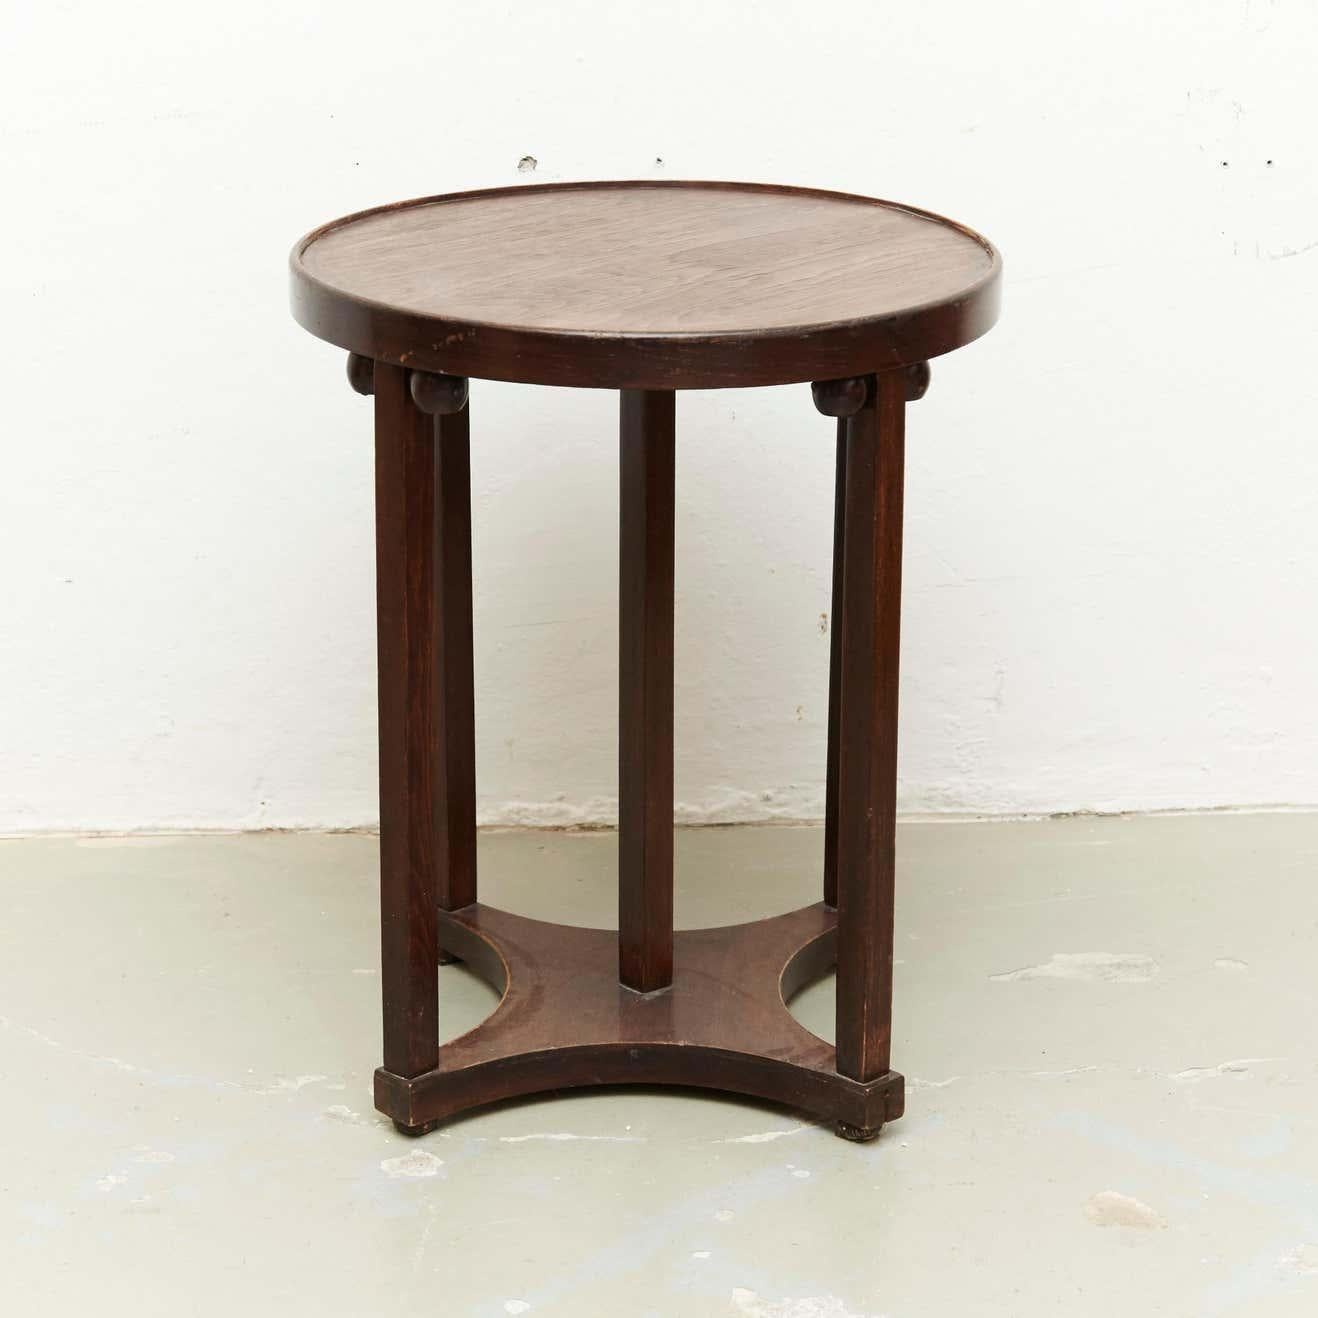 Table designed by Josef Hoffmann.
Model 915/1p Art Nouveau table from Jacob & Josef Kohn manufactured, circa 1920.

Measures: diameter 60, height 72 cm.

In original condition, with minor wear consistent with age and use, preserving a beautiful